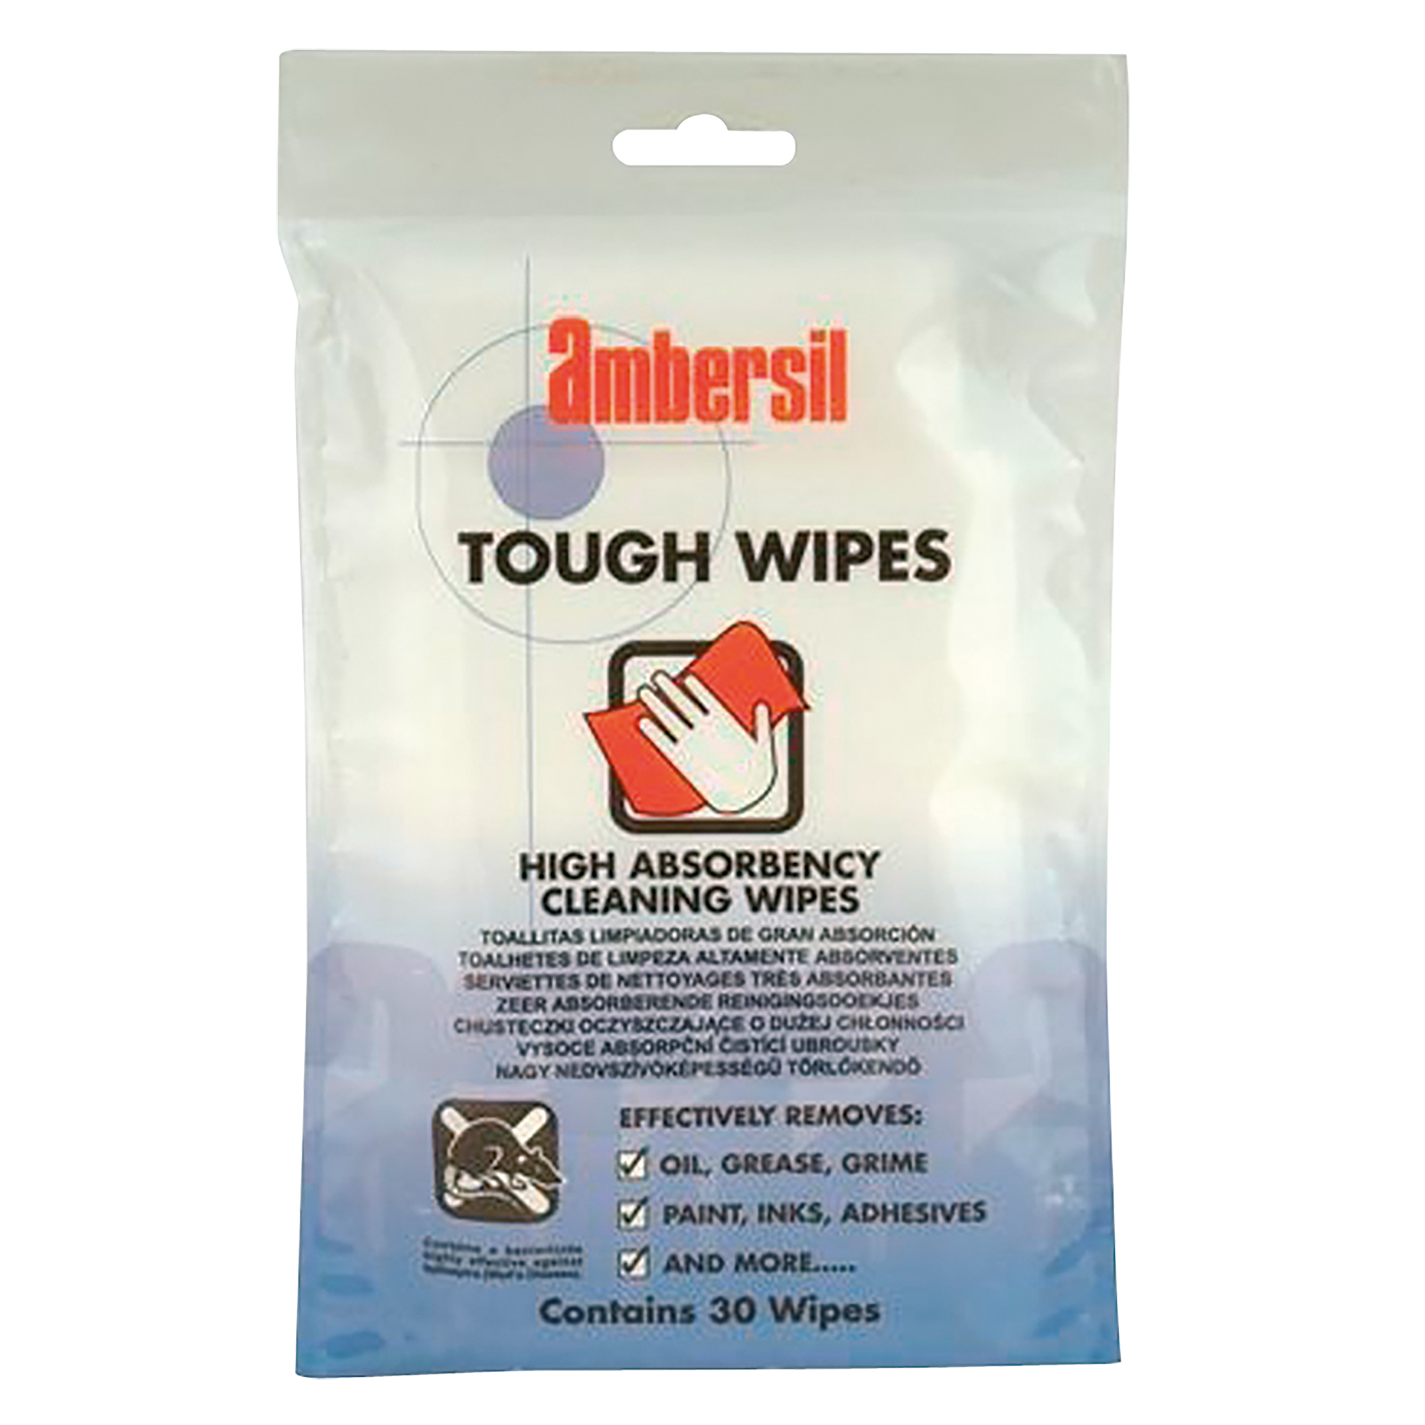 HI-ABSORBENCY CLEANING WIPES 100PCS